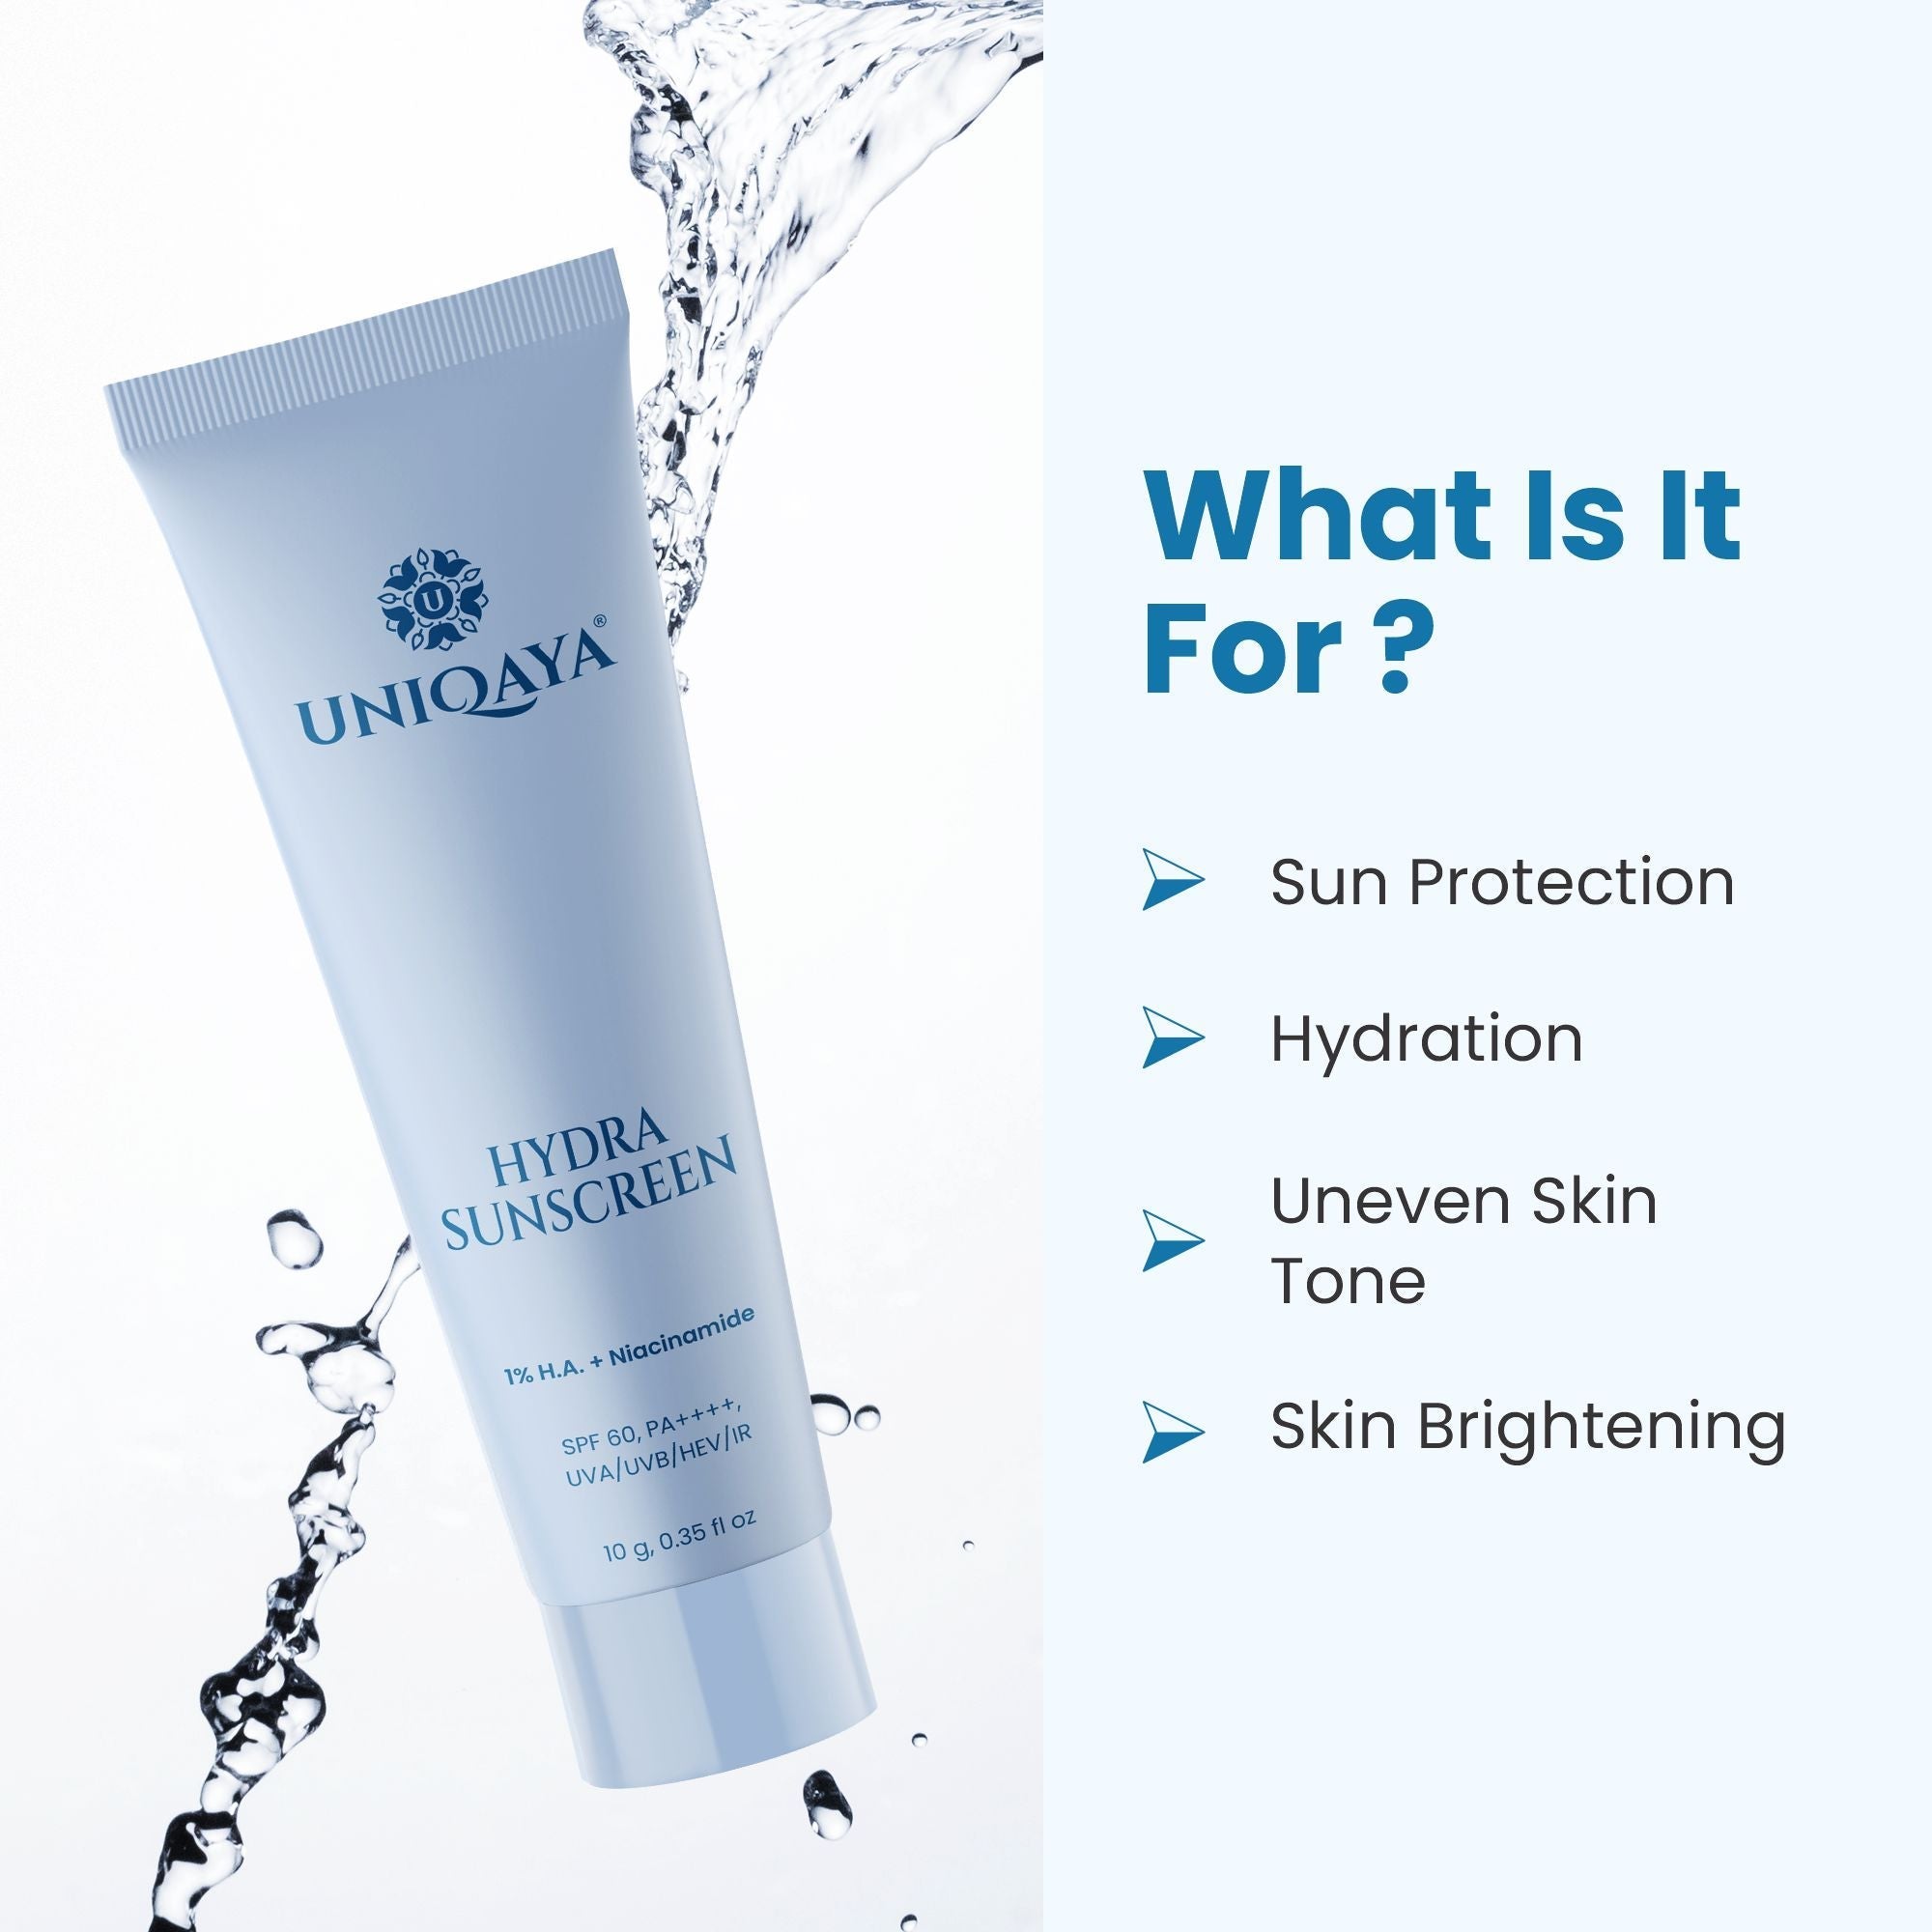 Hydra Sunscreen SPF 60 What Is It For?